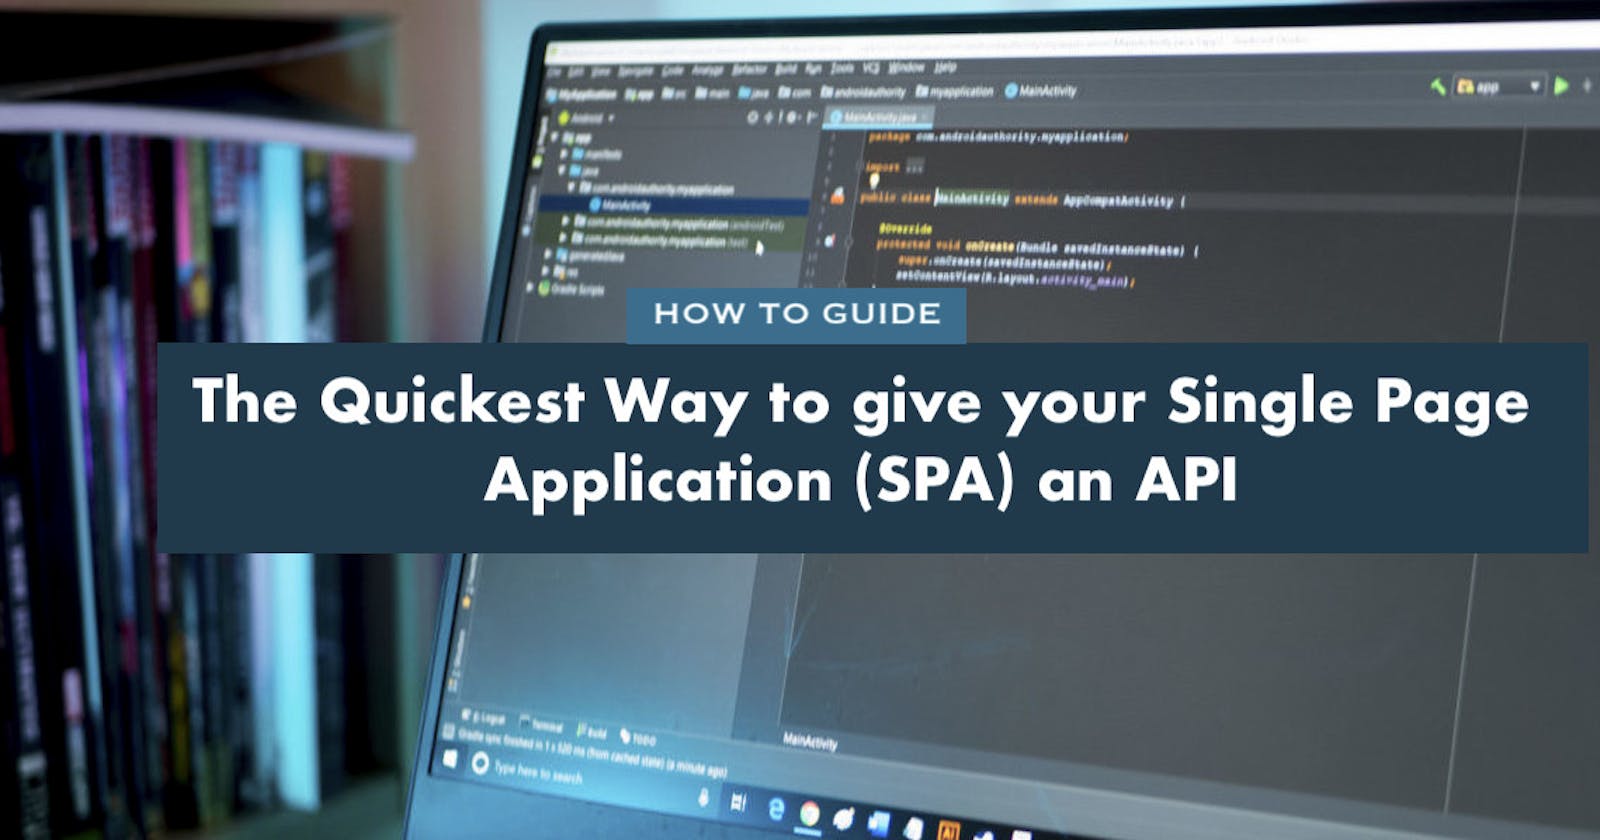 The Quickest Way to add a REST API to your Single Page App (SPA)